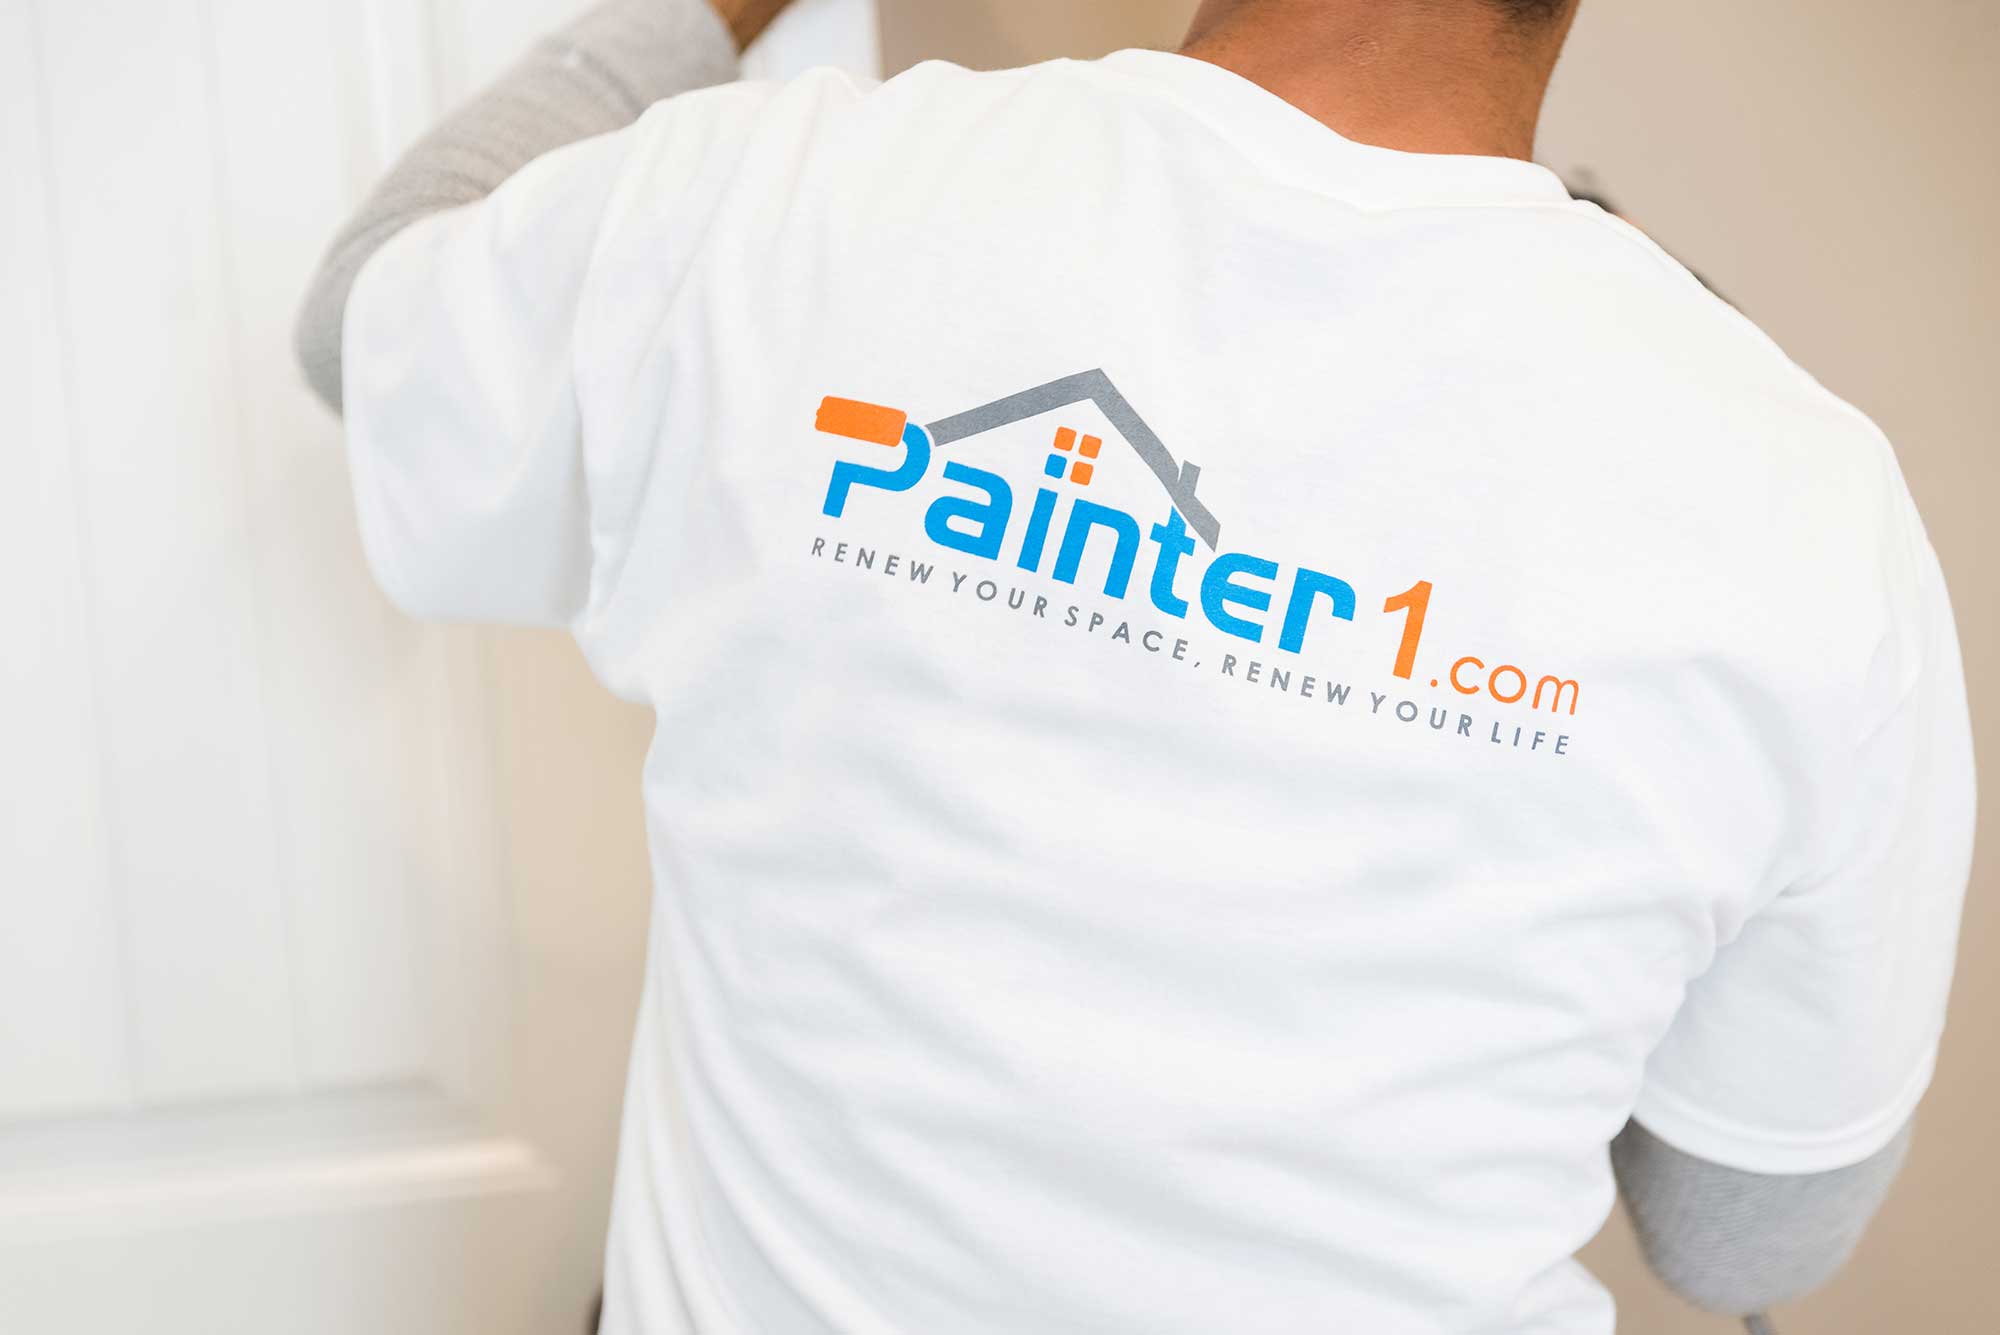 If you are searching for wallpaper removal in Chattanooga, Painter1 offers professional wallpaper removal in Chattanooga.